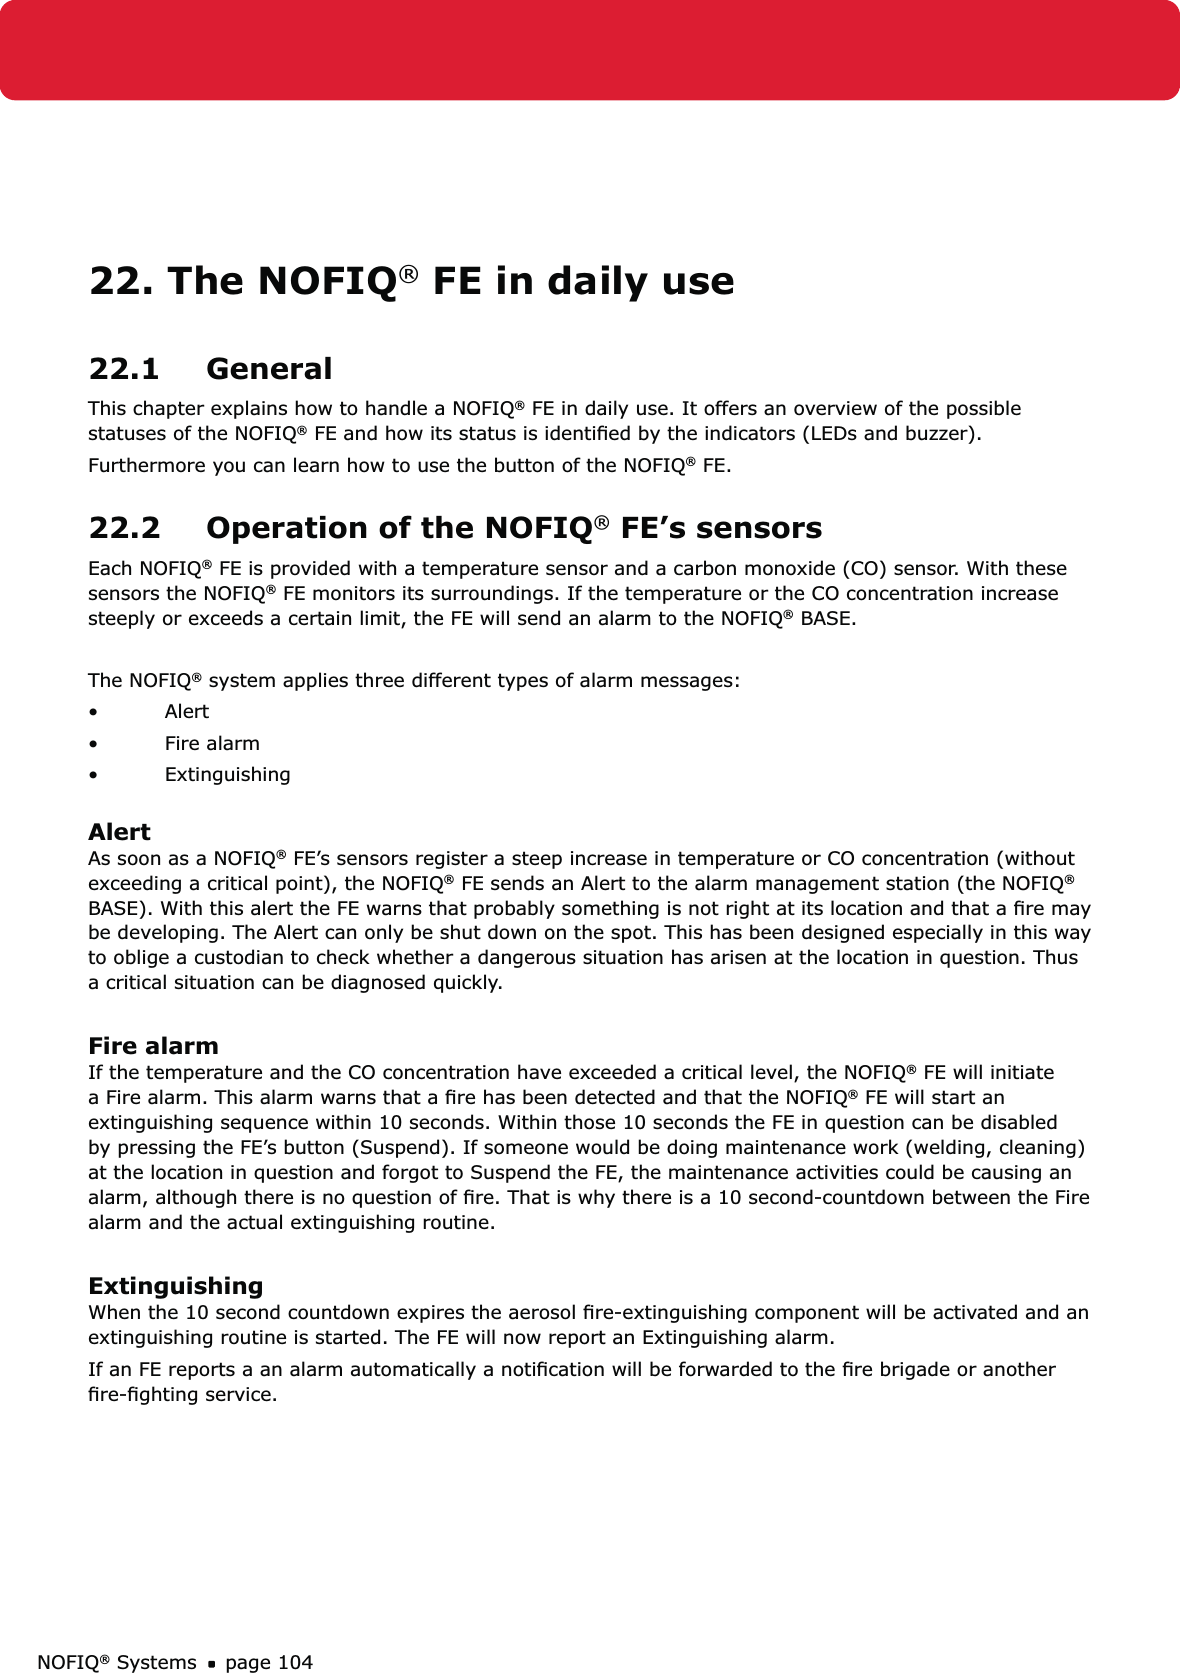 NOFIQ® Systems page 10422. The NOFIQ® FE in daily use22.1 GeneralThis chapter explains how to handle a NOFIQ® FE in daily use. It offers an overview of the possible statuses of the NOFIQ® FE and how its status is identiﬁed by the indicators (LEDs and buzzer).Furthermore you can learn how to use the button of the NOFIQ® FE.22.2  Operation of the NOFIQ® FE’s sensorsEach NOFIQ® FE is provided with a temperature sensor and a carbon monoxide (CO) sensor. With these sensors the NOFIQ® FE monitors its surroundings. If the temperature or the CO concentration increase steeply or exceeds a certain limit, the FE will send an alarm to the NOFIQ® BASE.The NOFIQ® system applies three different types of alarm messages:Alert• Fire alarm• Extinguishing• AlertAs soon as a NOFIQ® FE’s sensors register a steep increase in temperature or CO concentration (without exceeding a critical point), the NOFIQ® FE sends an Alert to the alarm management station (the NOFIQ® BASE). With this alert the FE warns that probably something is not right at its location and that a ﬁre may be developing. The Alert can only be shut down on the spot. This has been designed especially in this way to oblige a custodian to check whether a dangerous situation has arisen at the location in question. Thus a critical situation can be diagnosed quickly.Fire alarmIf the temperature and the CO concentration have exceeded a critical level, the NOFIQ® FE will initiate a Fire alarm. This alarm warns that a ﬁre has been detected and that the NOFIQ® FE will start an extinguishing sequence within 10 seconds. Within those 10 seconds the FE in question can be disabled by pressing the FE’s button (Suspend). If someone would be doing maintenance work (welding, cleaning) at the location in question and forgot to Suspend the FE, the maintenance activities could be causing an alarm, although there is no question of ﬁre. That is why there is a 10 second-countdown between the Fire alarm and the actual extinguishing routine.ExtinguishingWhen the 10 second countdown expires the aerosol ﬁre-extinguishing component will be activated and an extinguishing routine is started. The FE will now report an Extinguishing alarm. If an FE reports a an alarm automatically a notiﬁcation will be forwarded to the ﬁre brigade or another ﬁre-ﬁghting service.